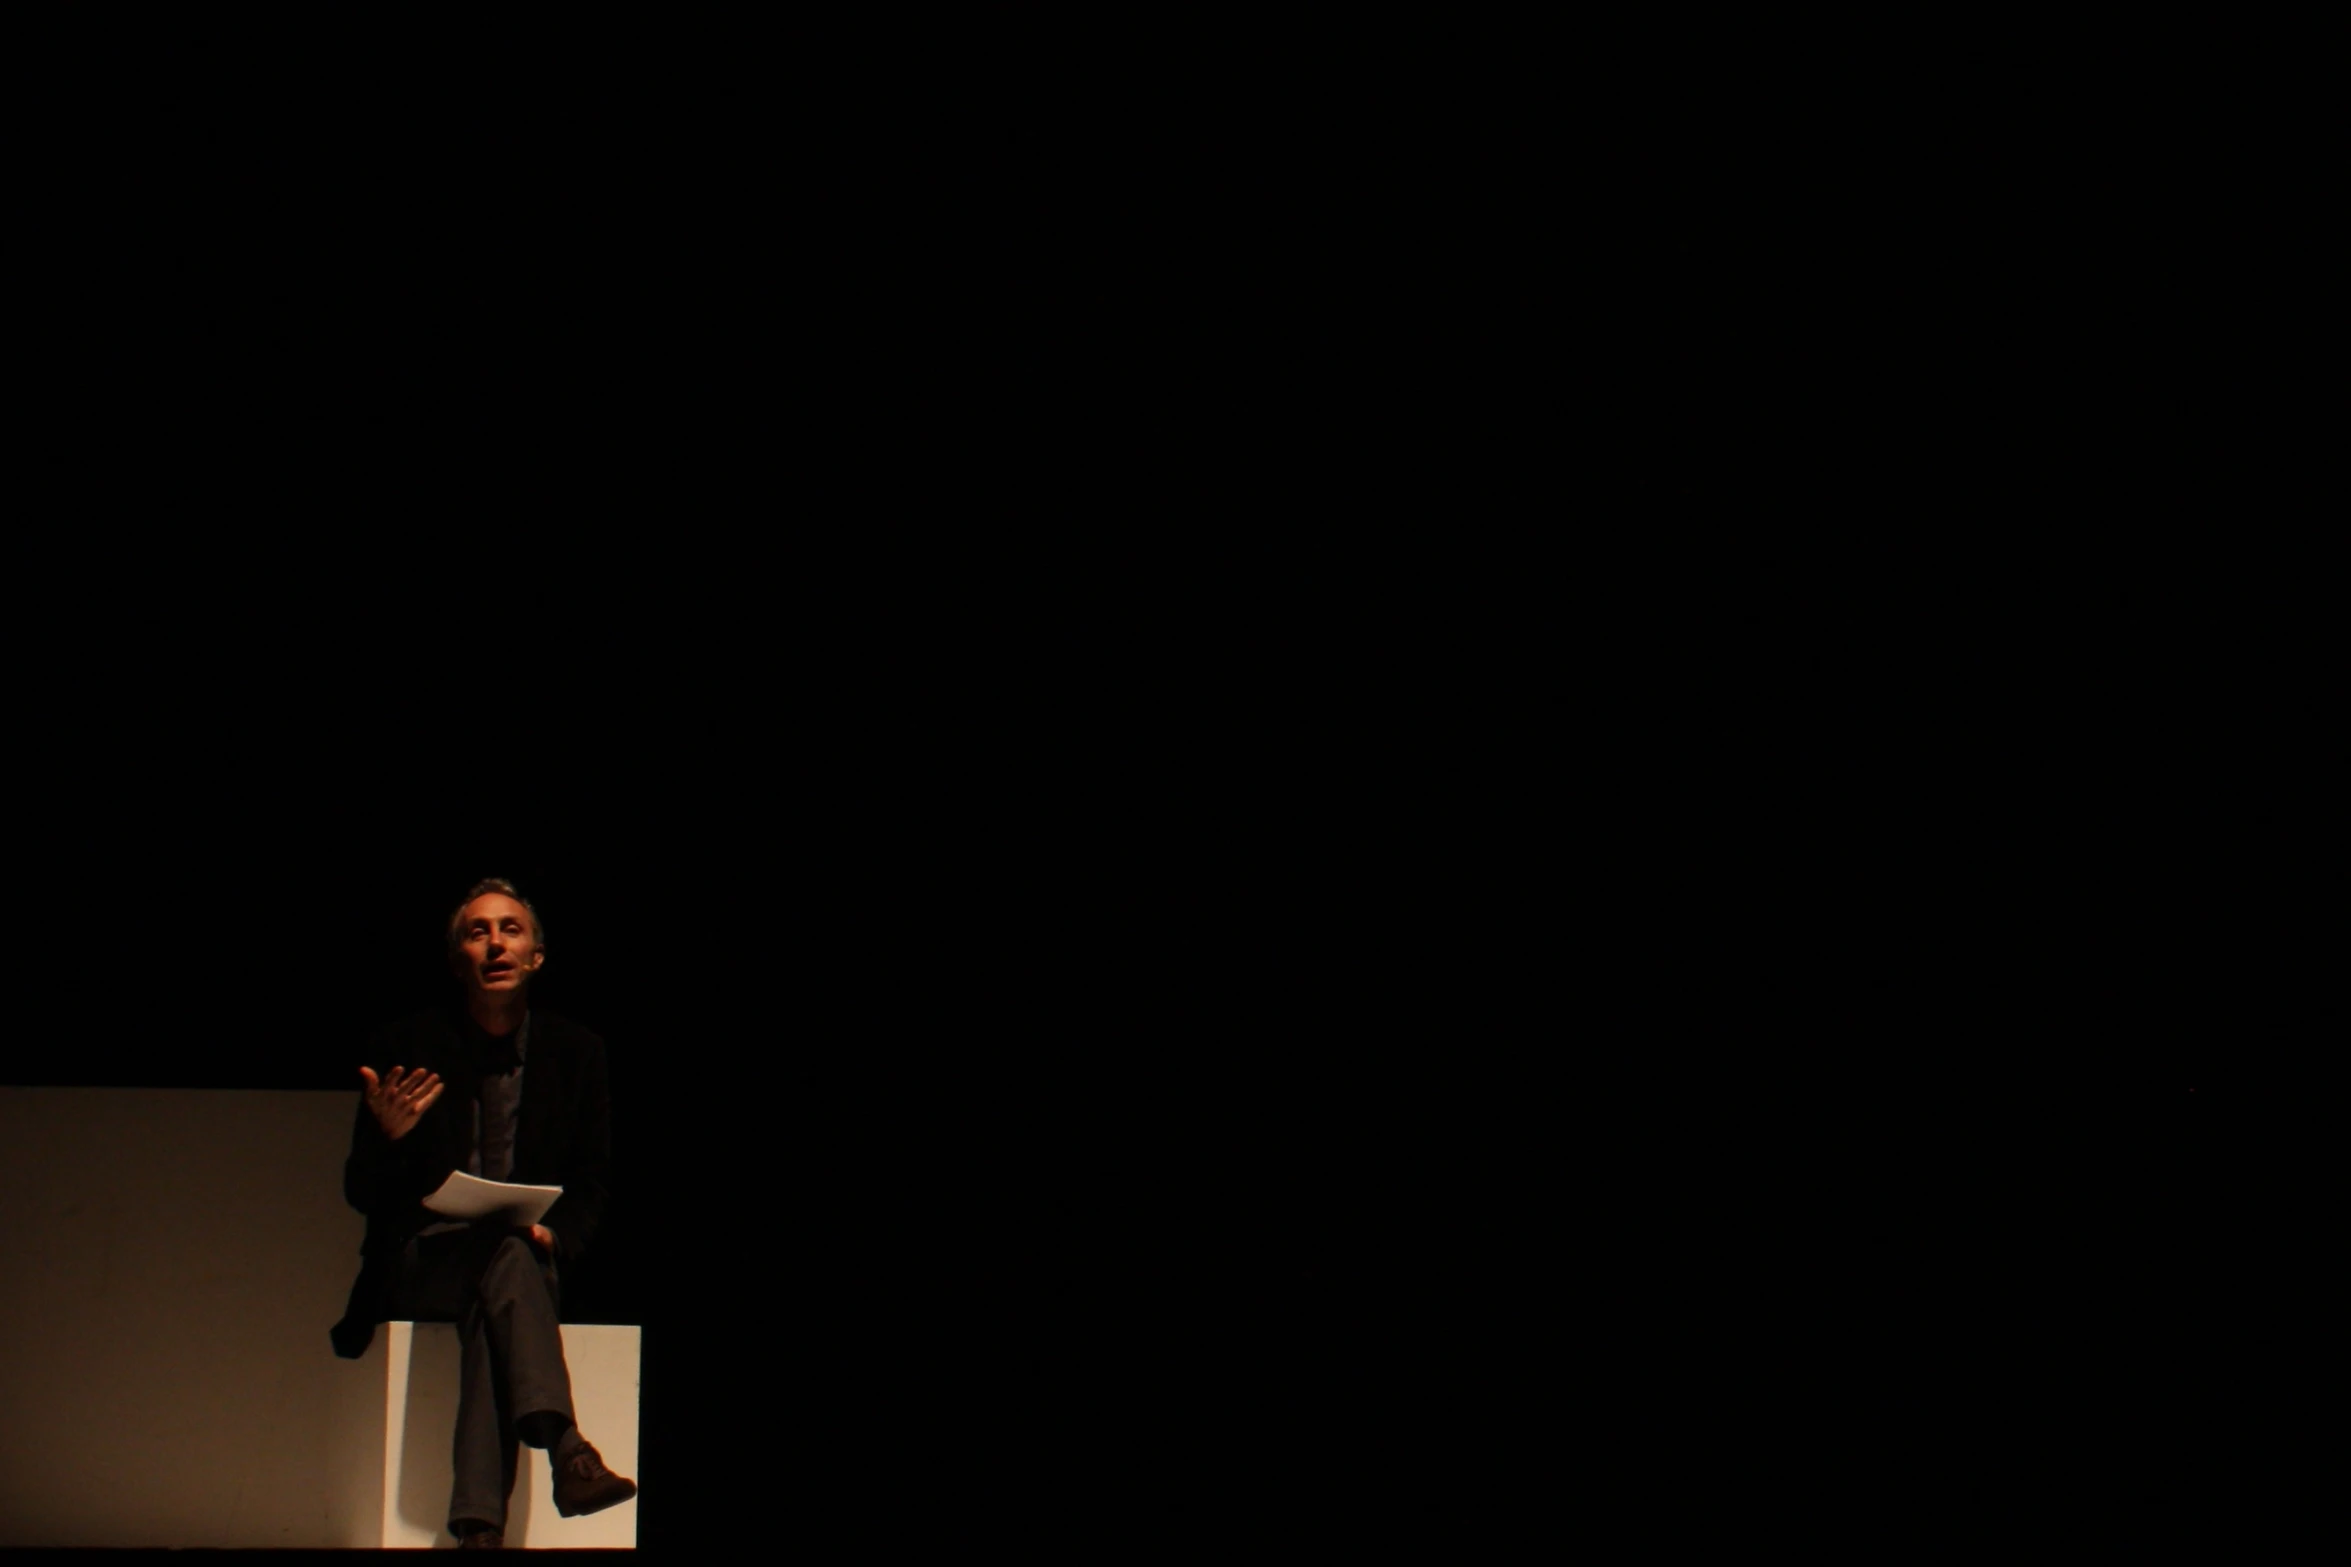 the woman is waiting at a dark stage to speak